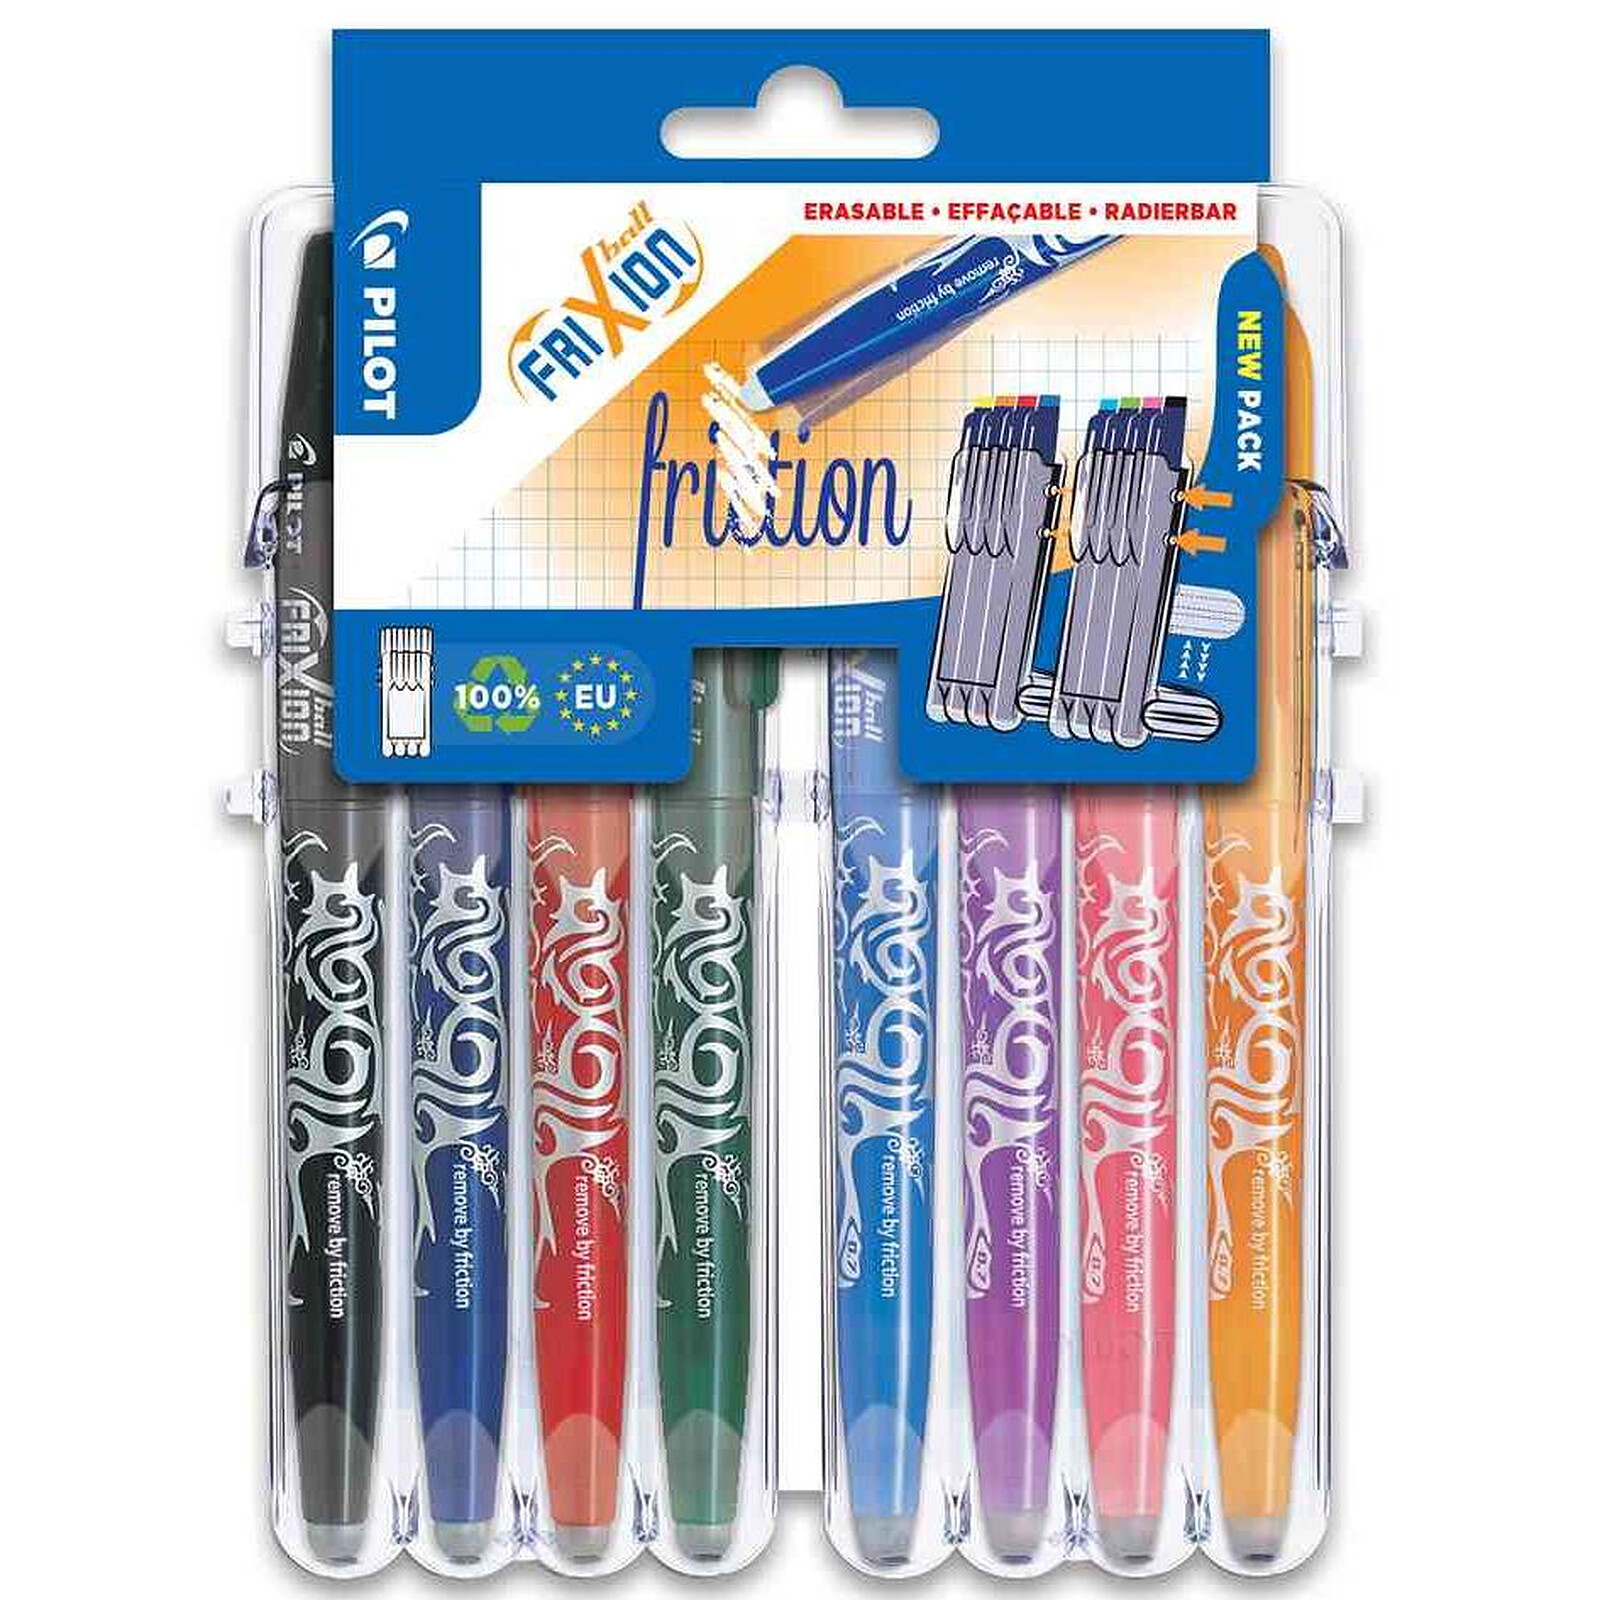 PILOT FRIXION CLICKER 07 Stylo Roller rétractable Pointe moyenne Encre Rouge